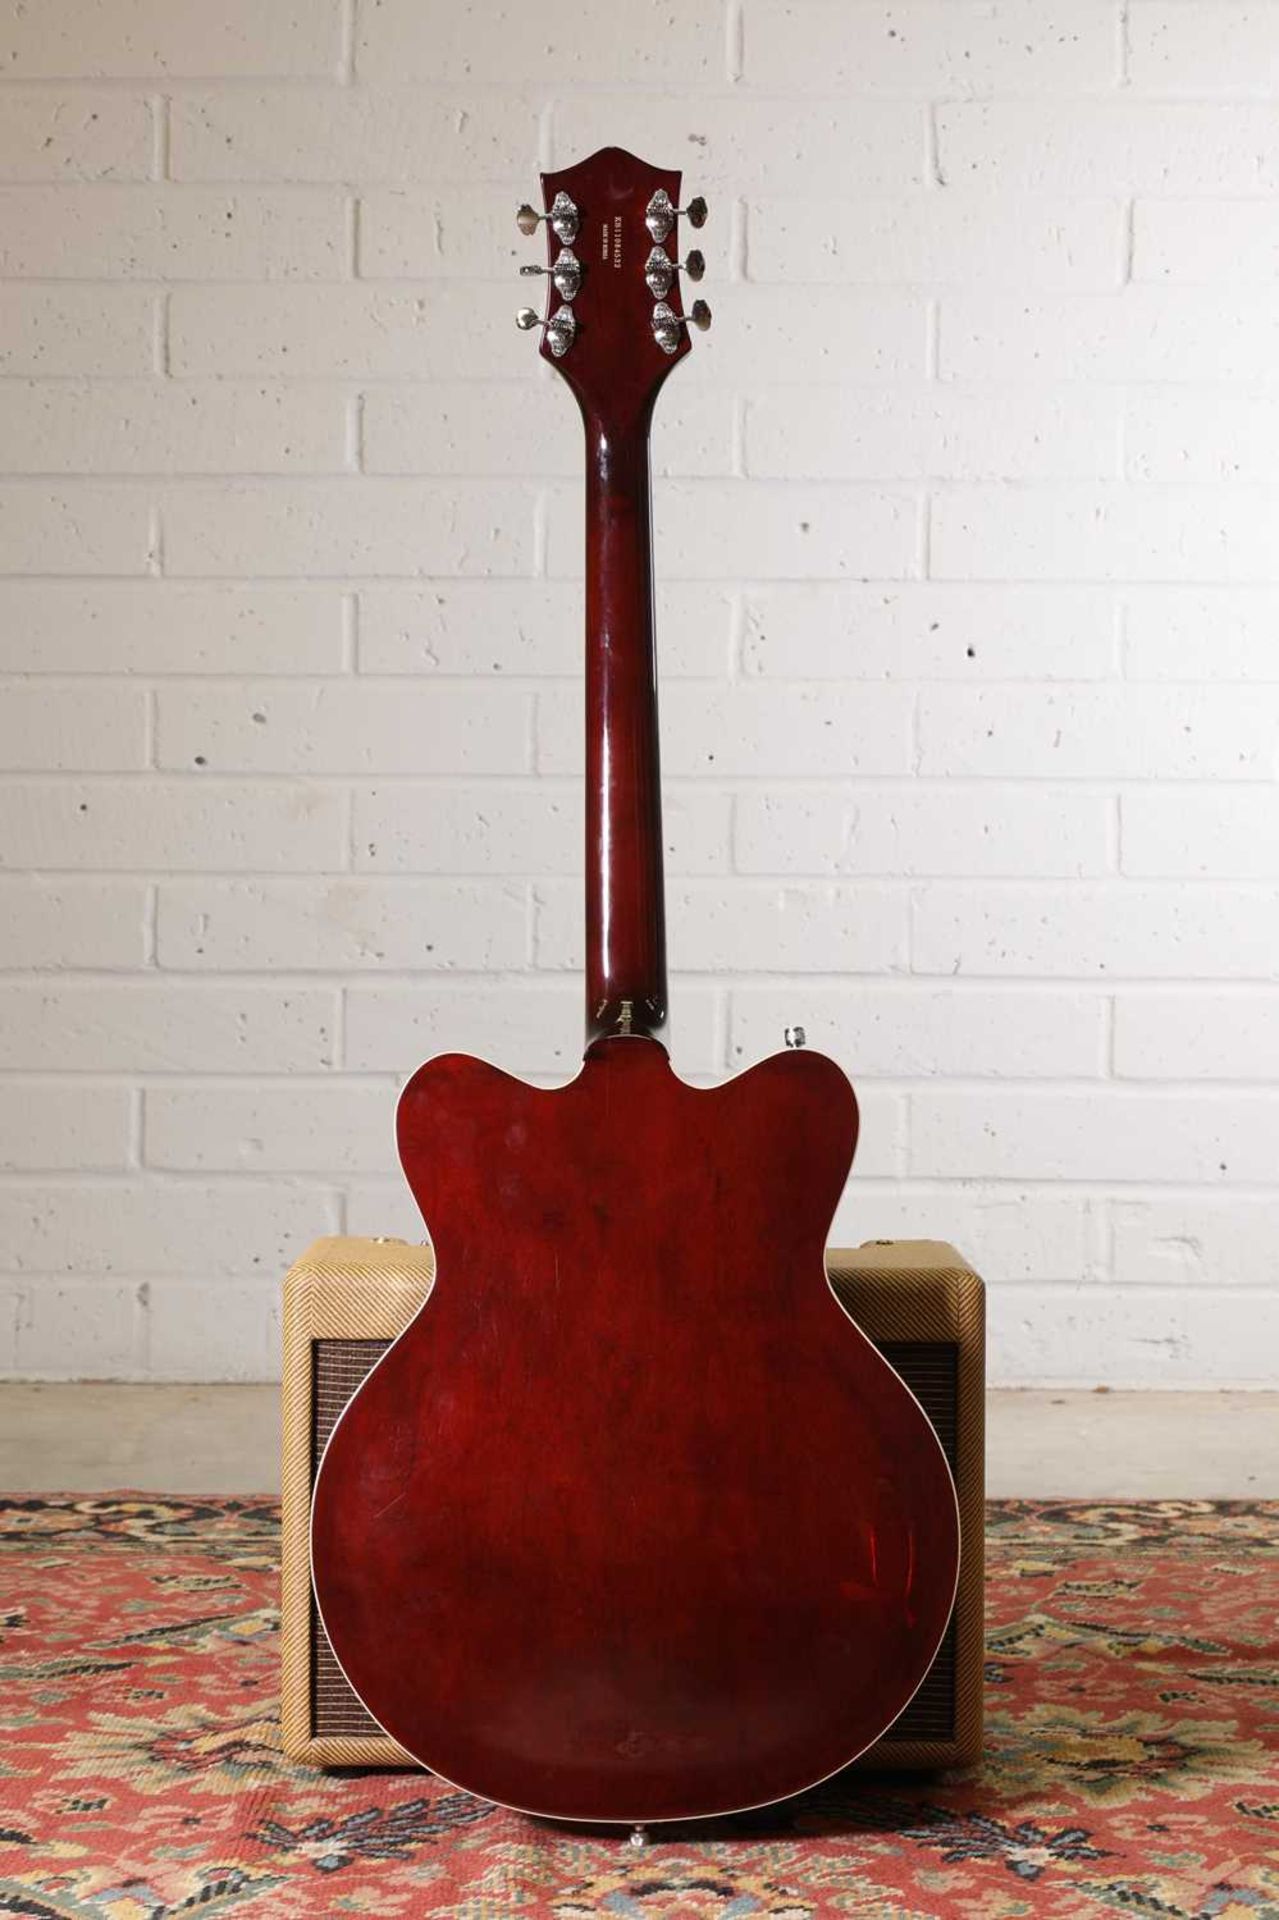 A Gretsch Electromatic semi-hollow electric guitar, - Image 2 of 8